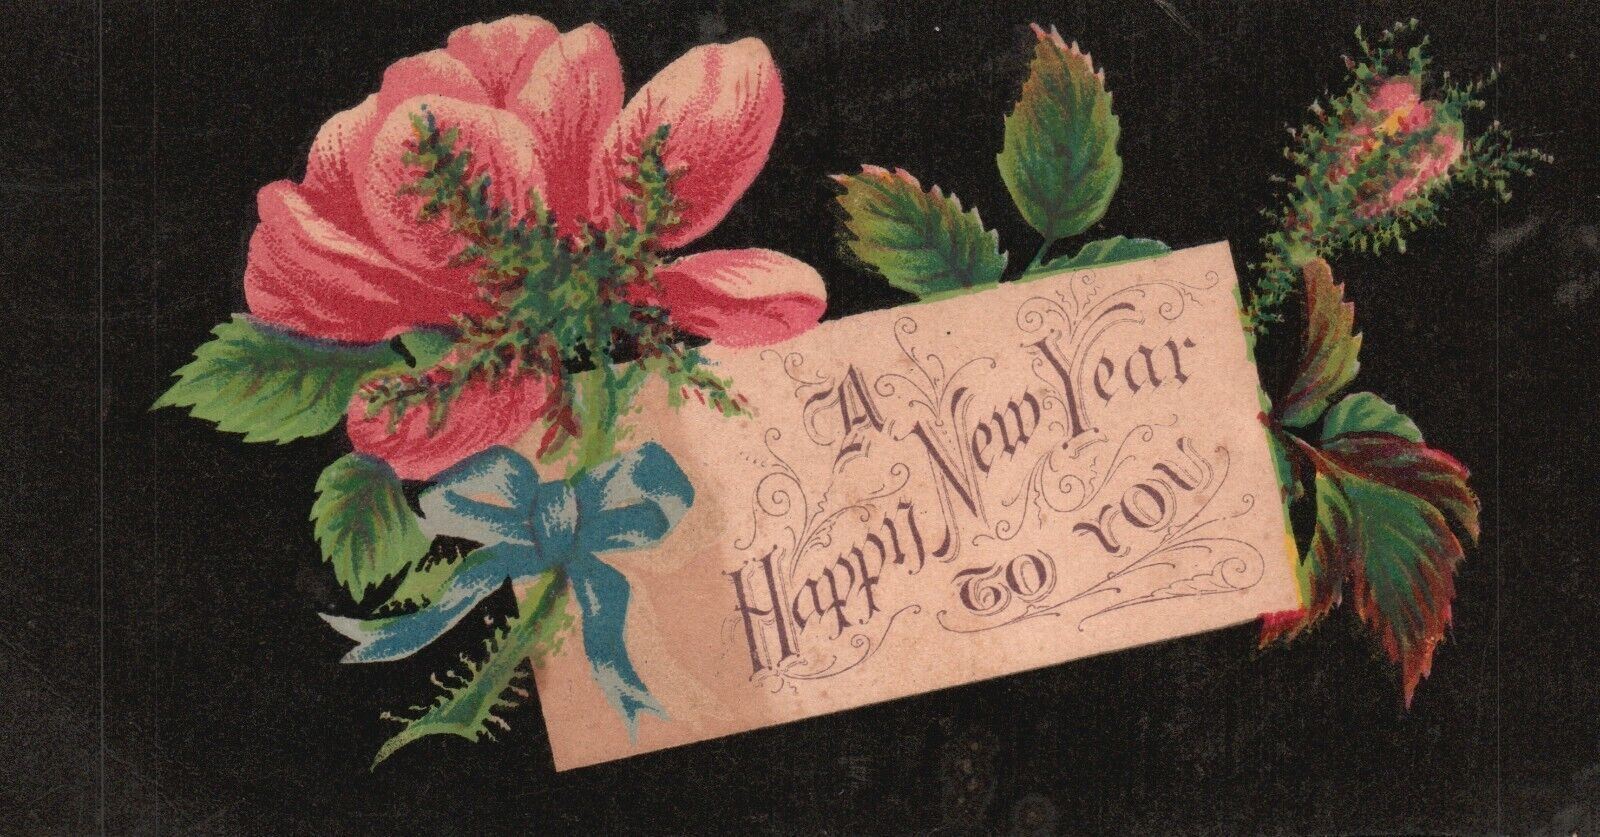 1880s-90s Pink Flower Black Background A Happy New Year To You Trade Card